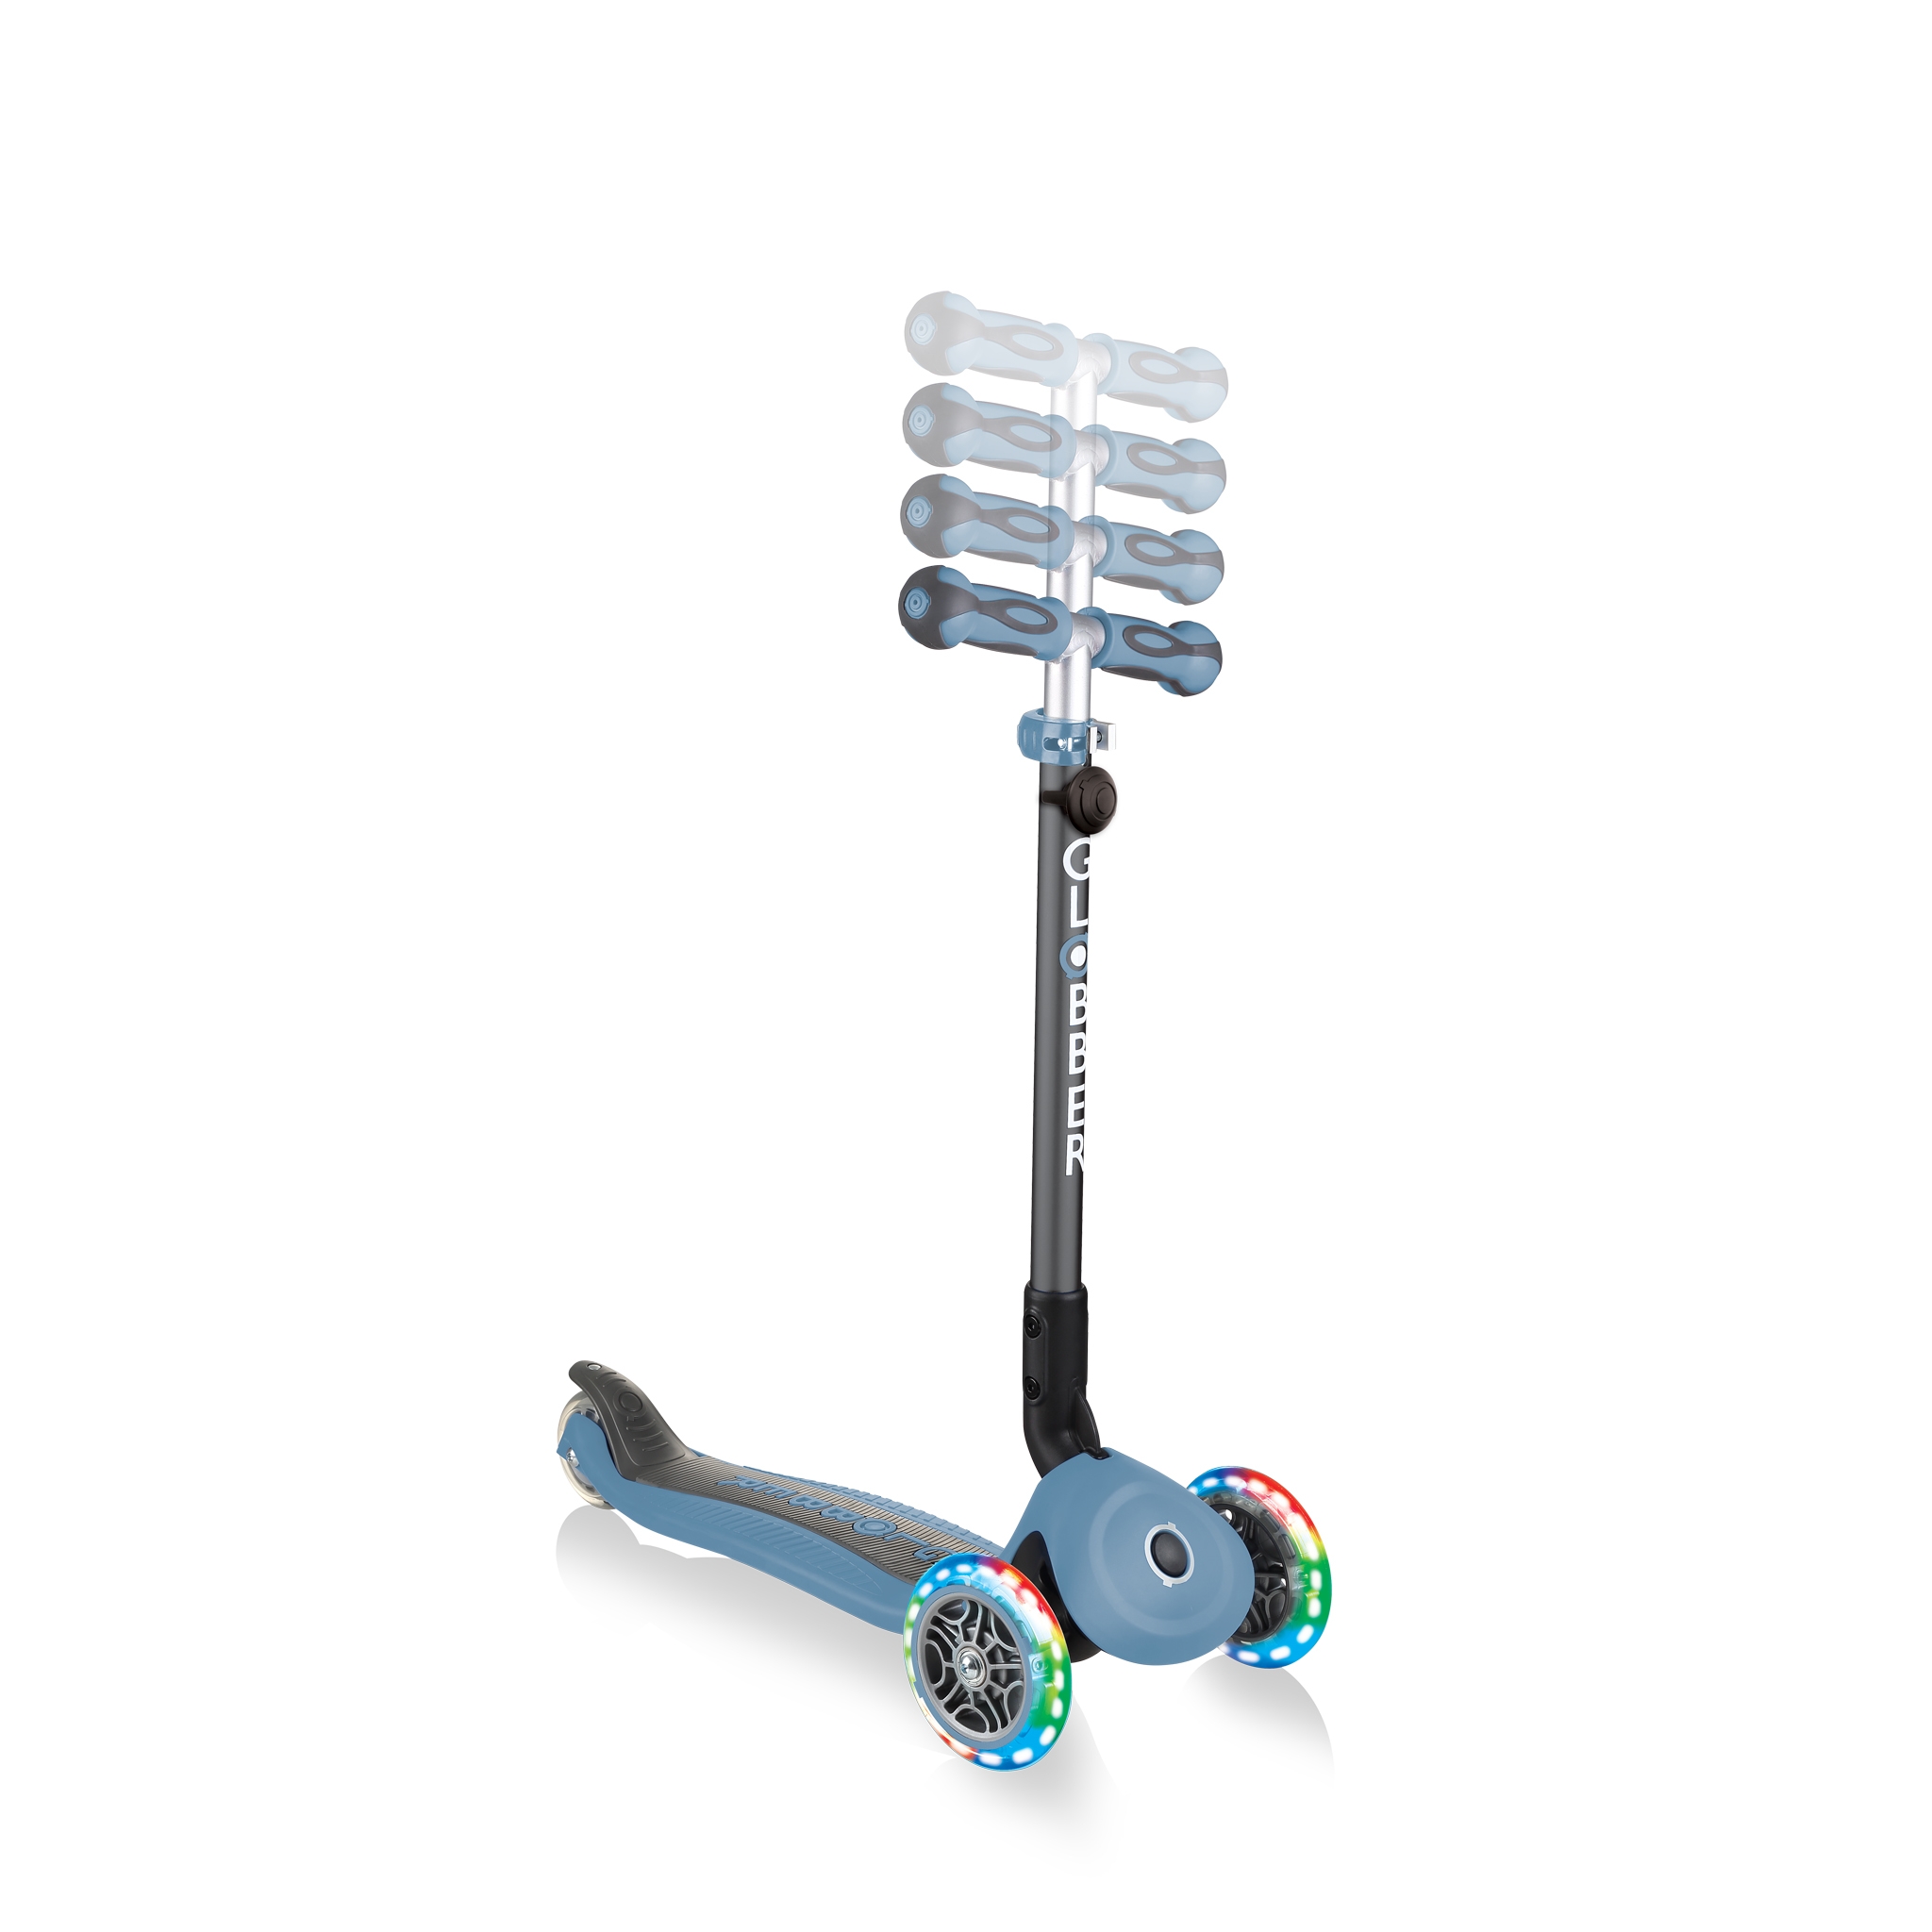 GO-UP-DELUXE-LIGHTS-ride-on-walking-bike-scooter-with-4-height-adjustable-T-bar-and-light-up-wheels-ash-blue 4